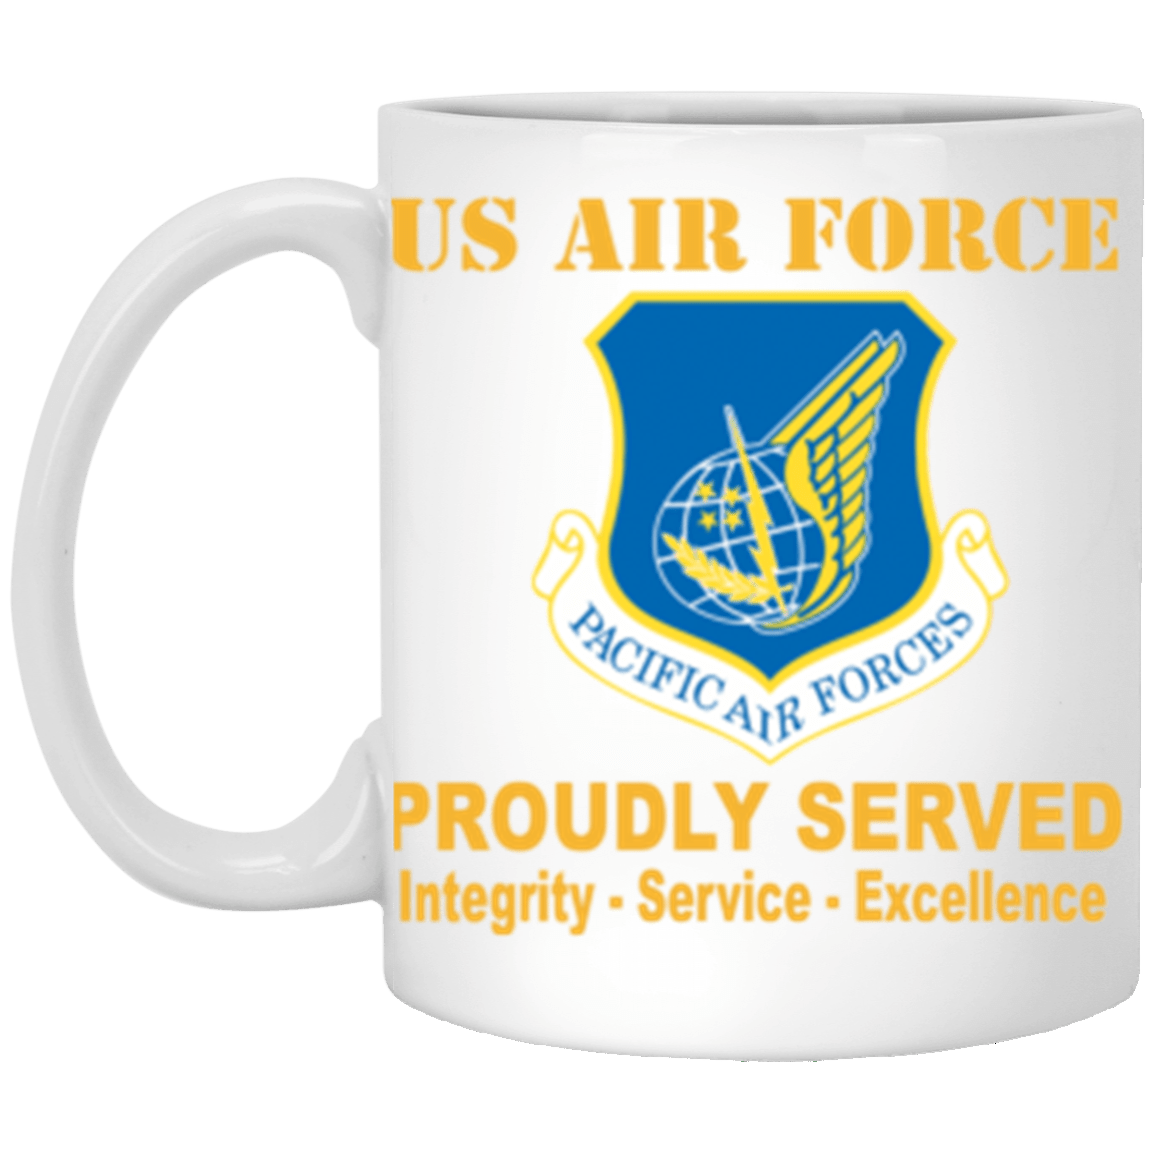 US Air Force Pacific Air Forces Proudly Served Core Values 11 oz. White Mug-Drinkware-Veterans Nation